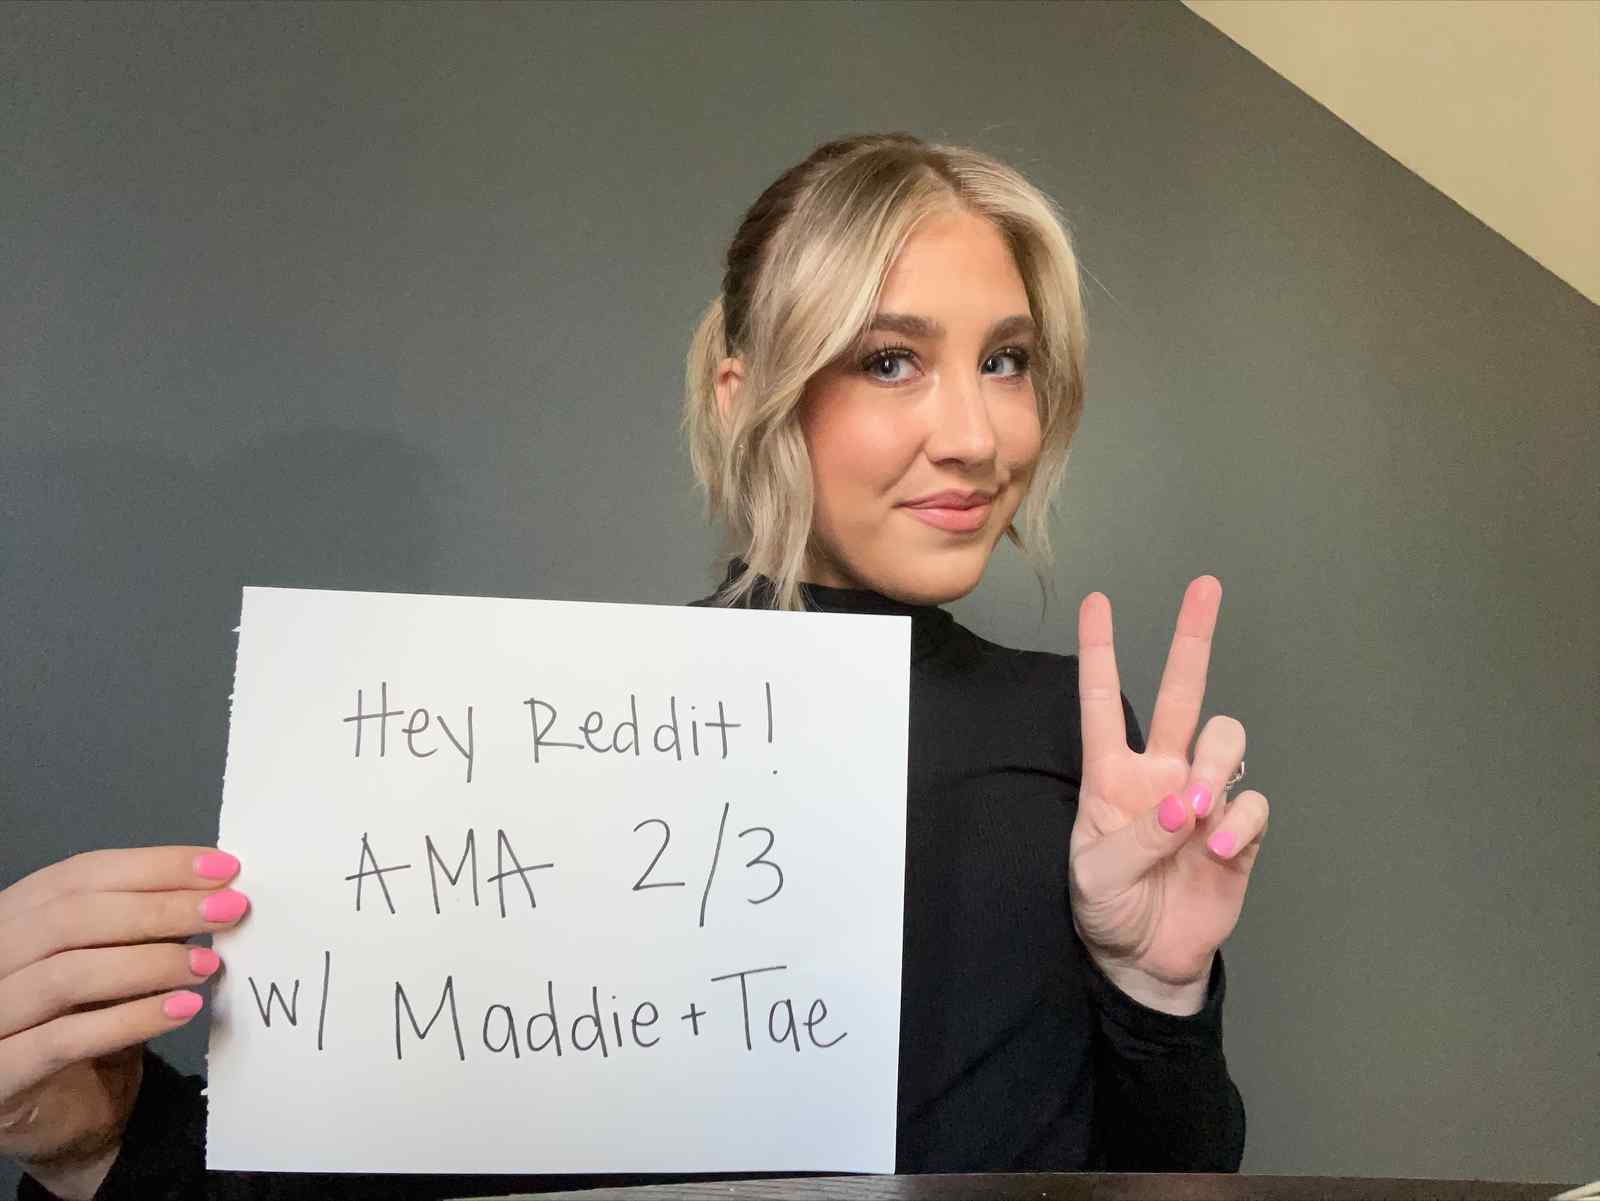 TONIGHT! Join Maddie on Reddit for an AMA (Ask Me Anything) at 5pm CT  - https://www.reddit.com/r/Music/